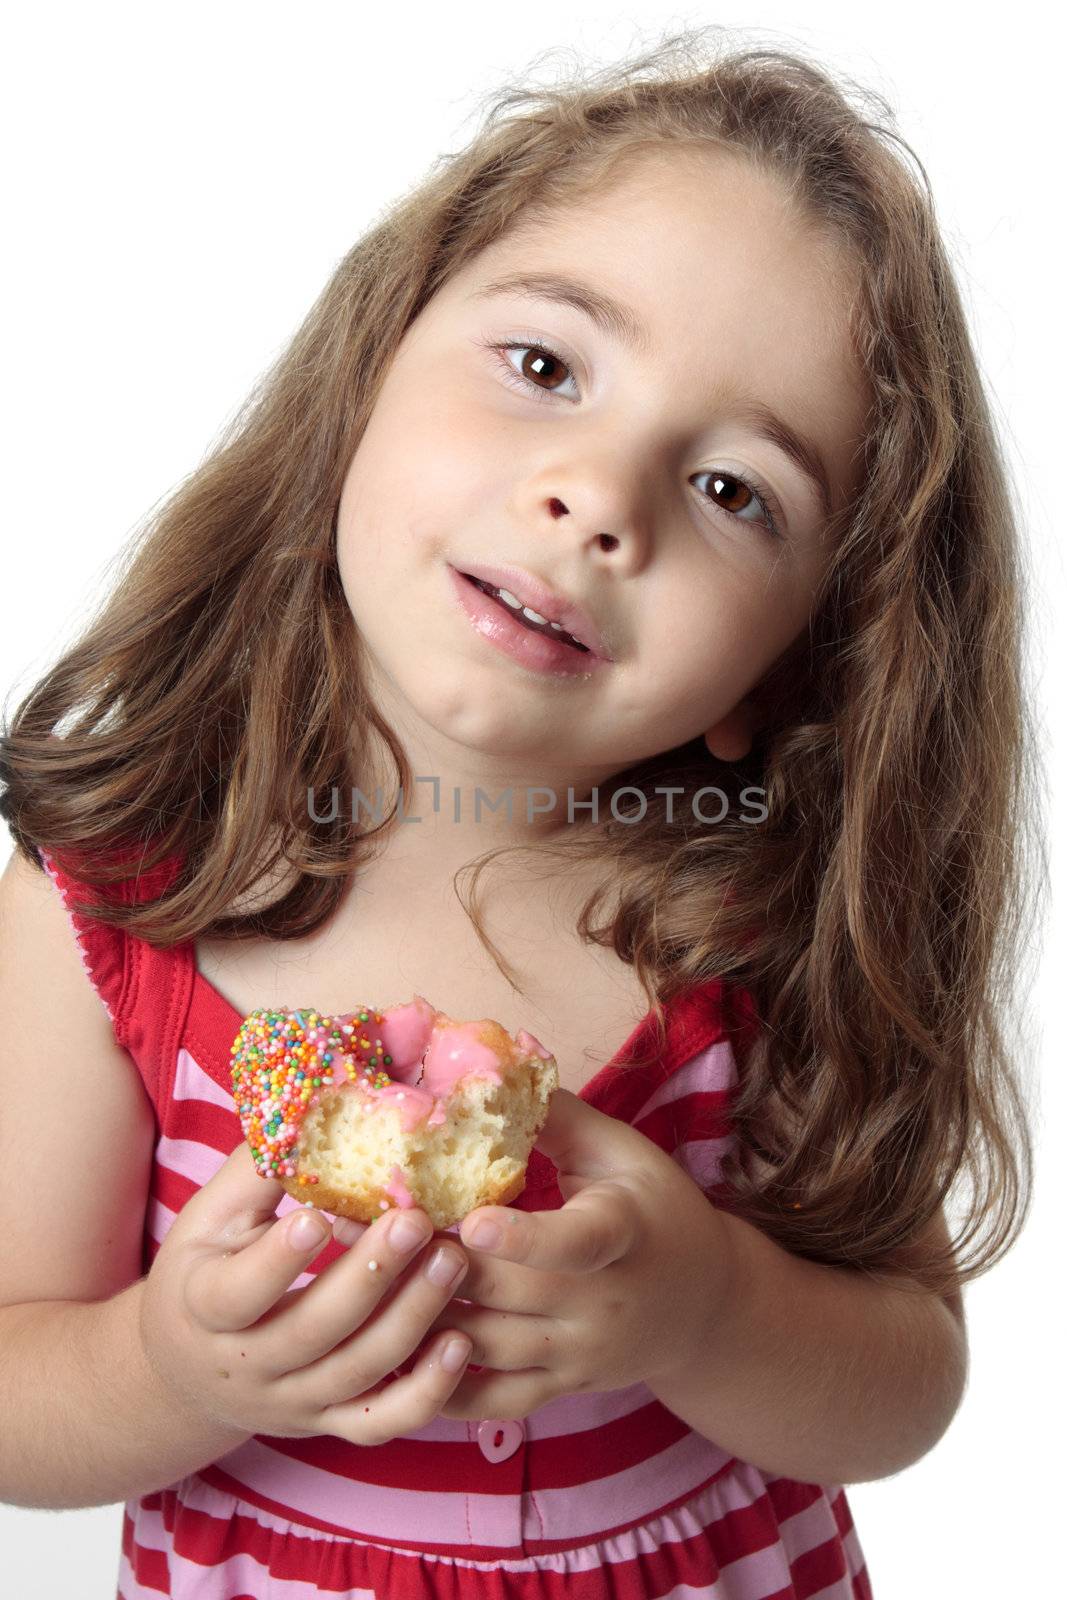 Small child eating a pink iced  doughnut.  She has messy fingers.